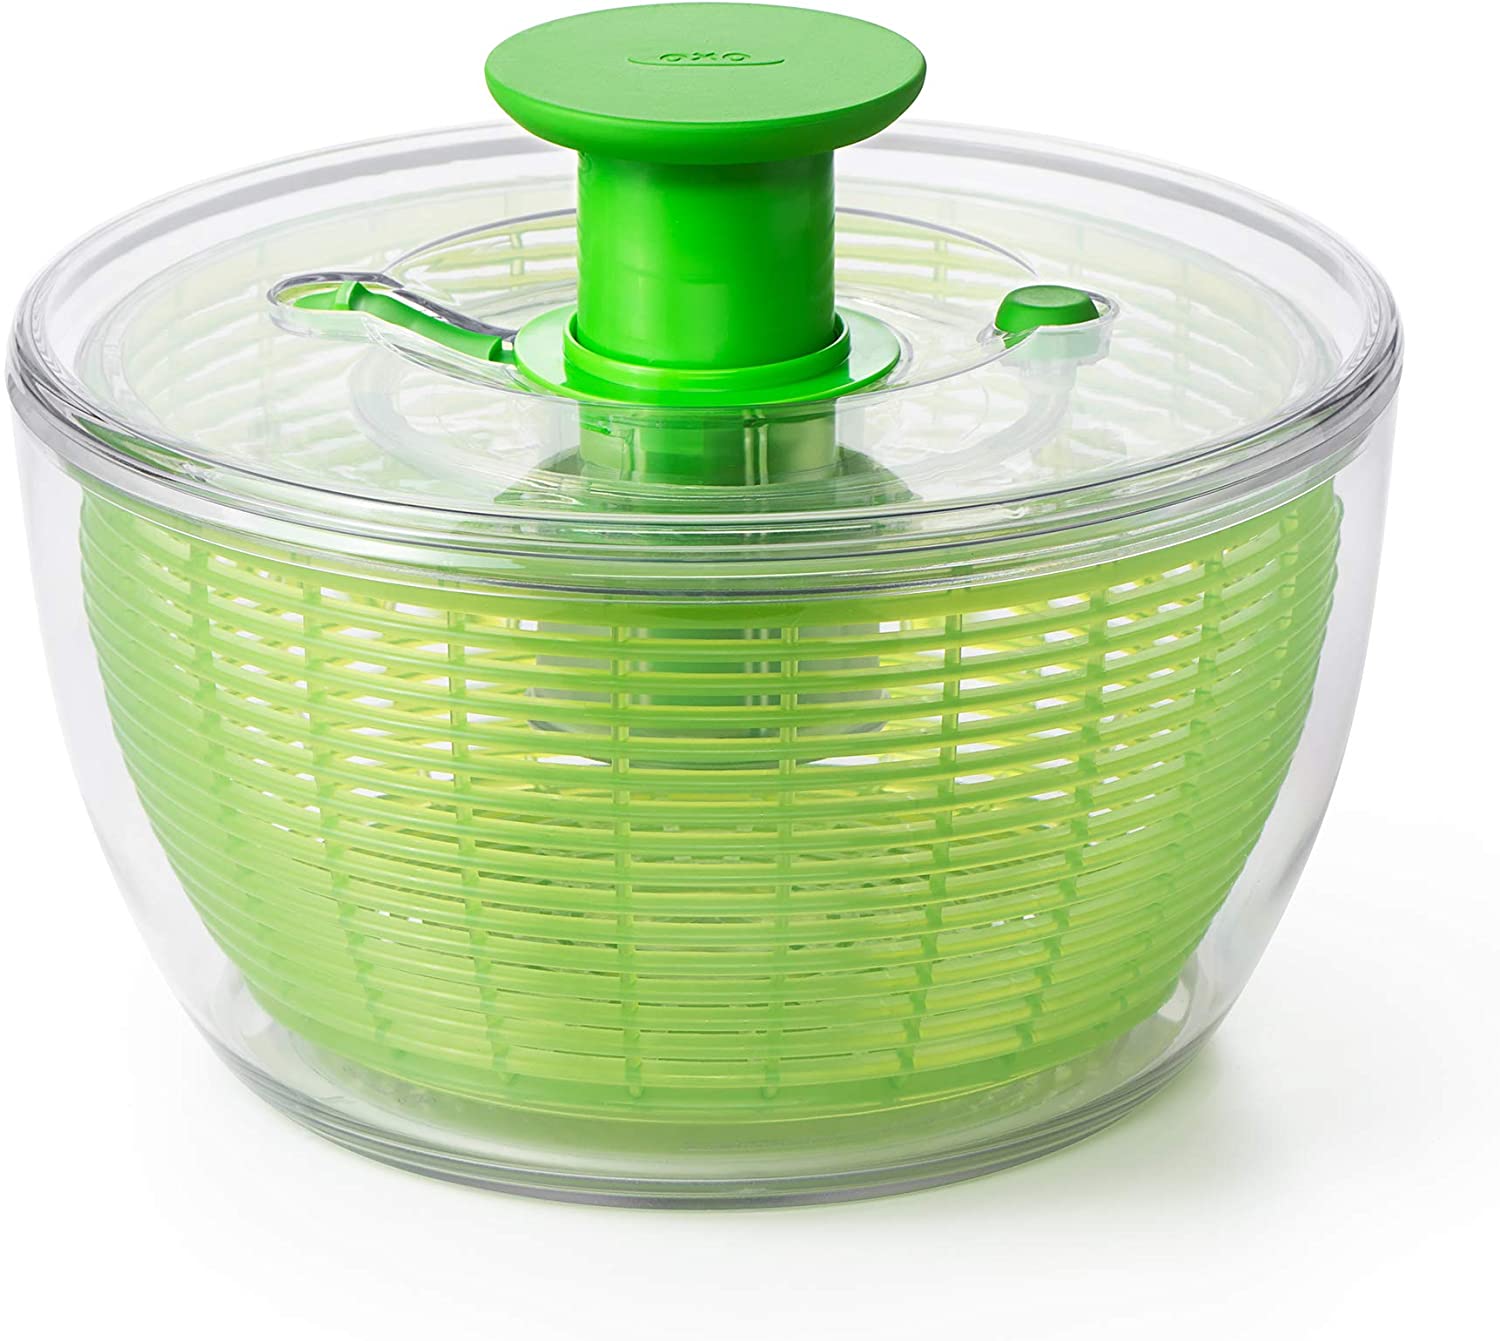 OXO Good Grips Large Salad Spinner - 6.22 Qt., White New Zealand